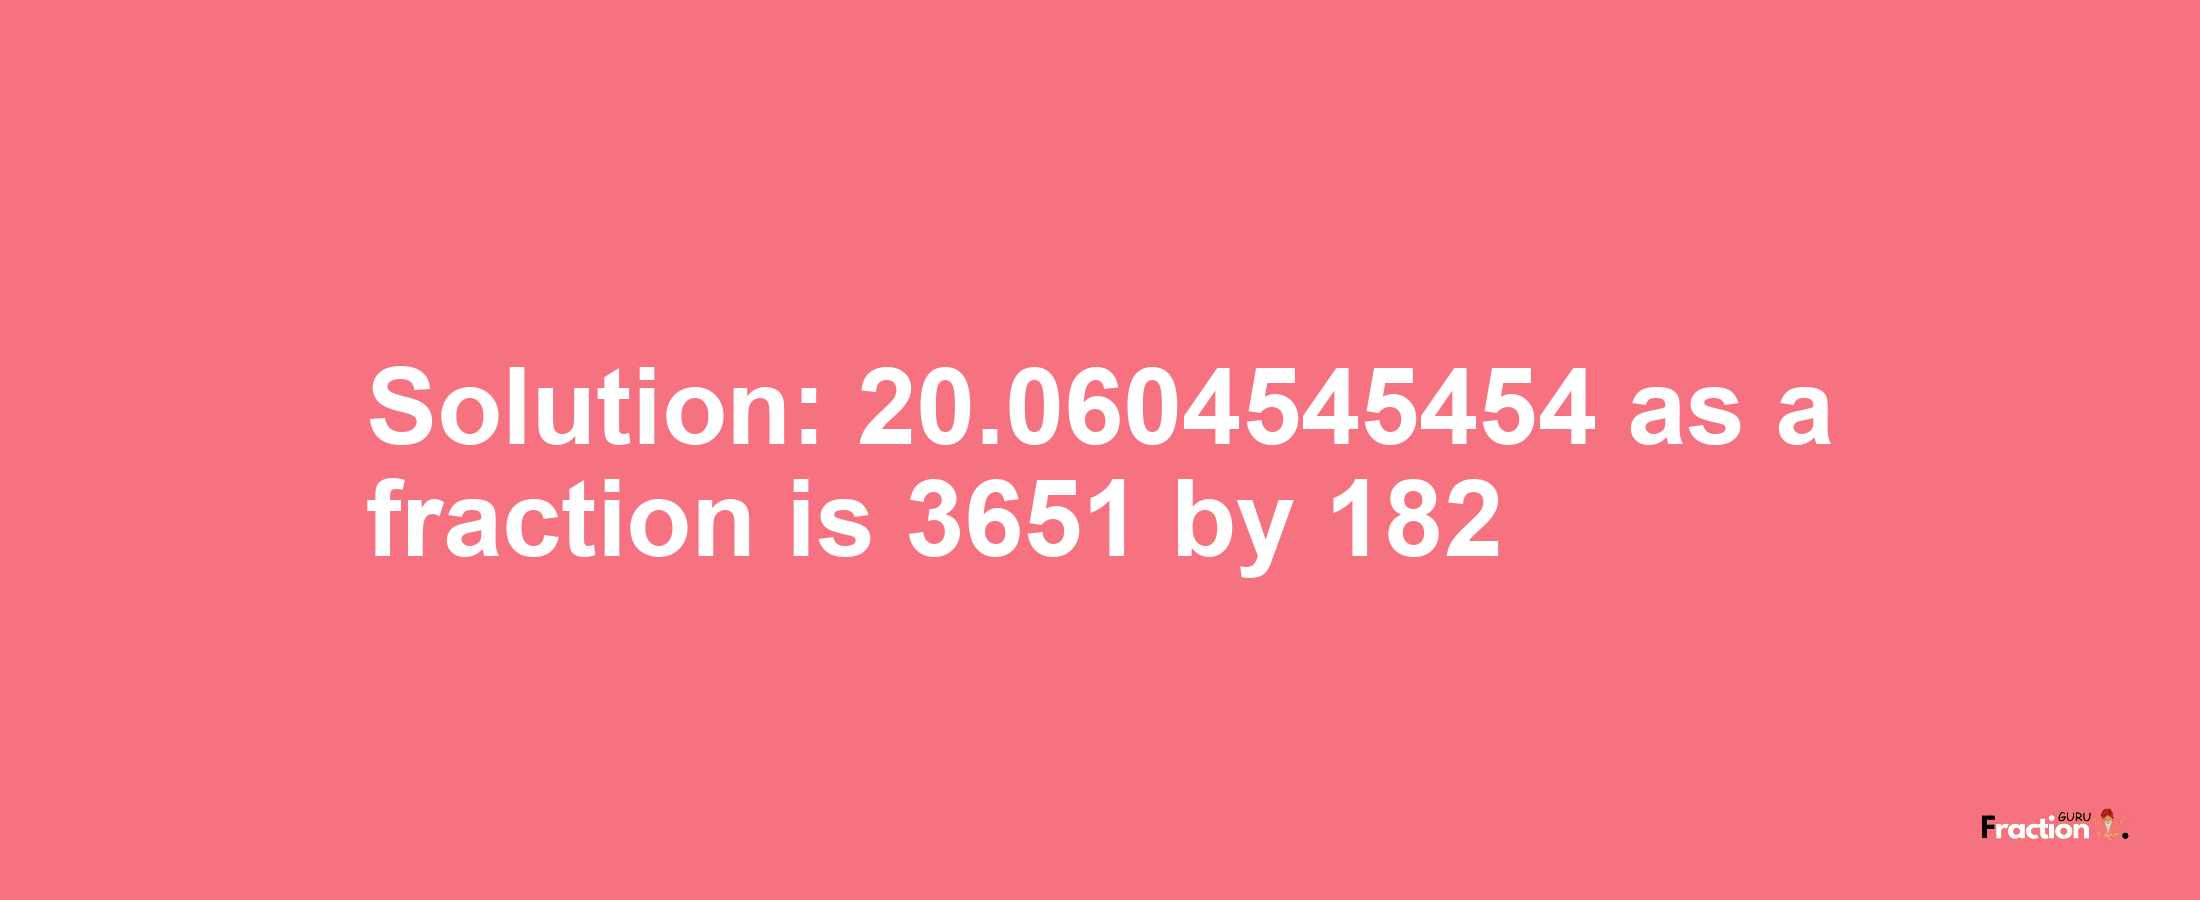 Solution:20.0604545454 as a fraction is 3651/182